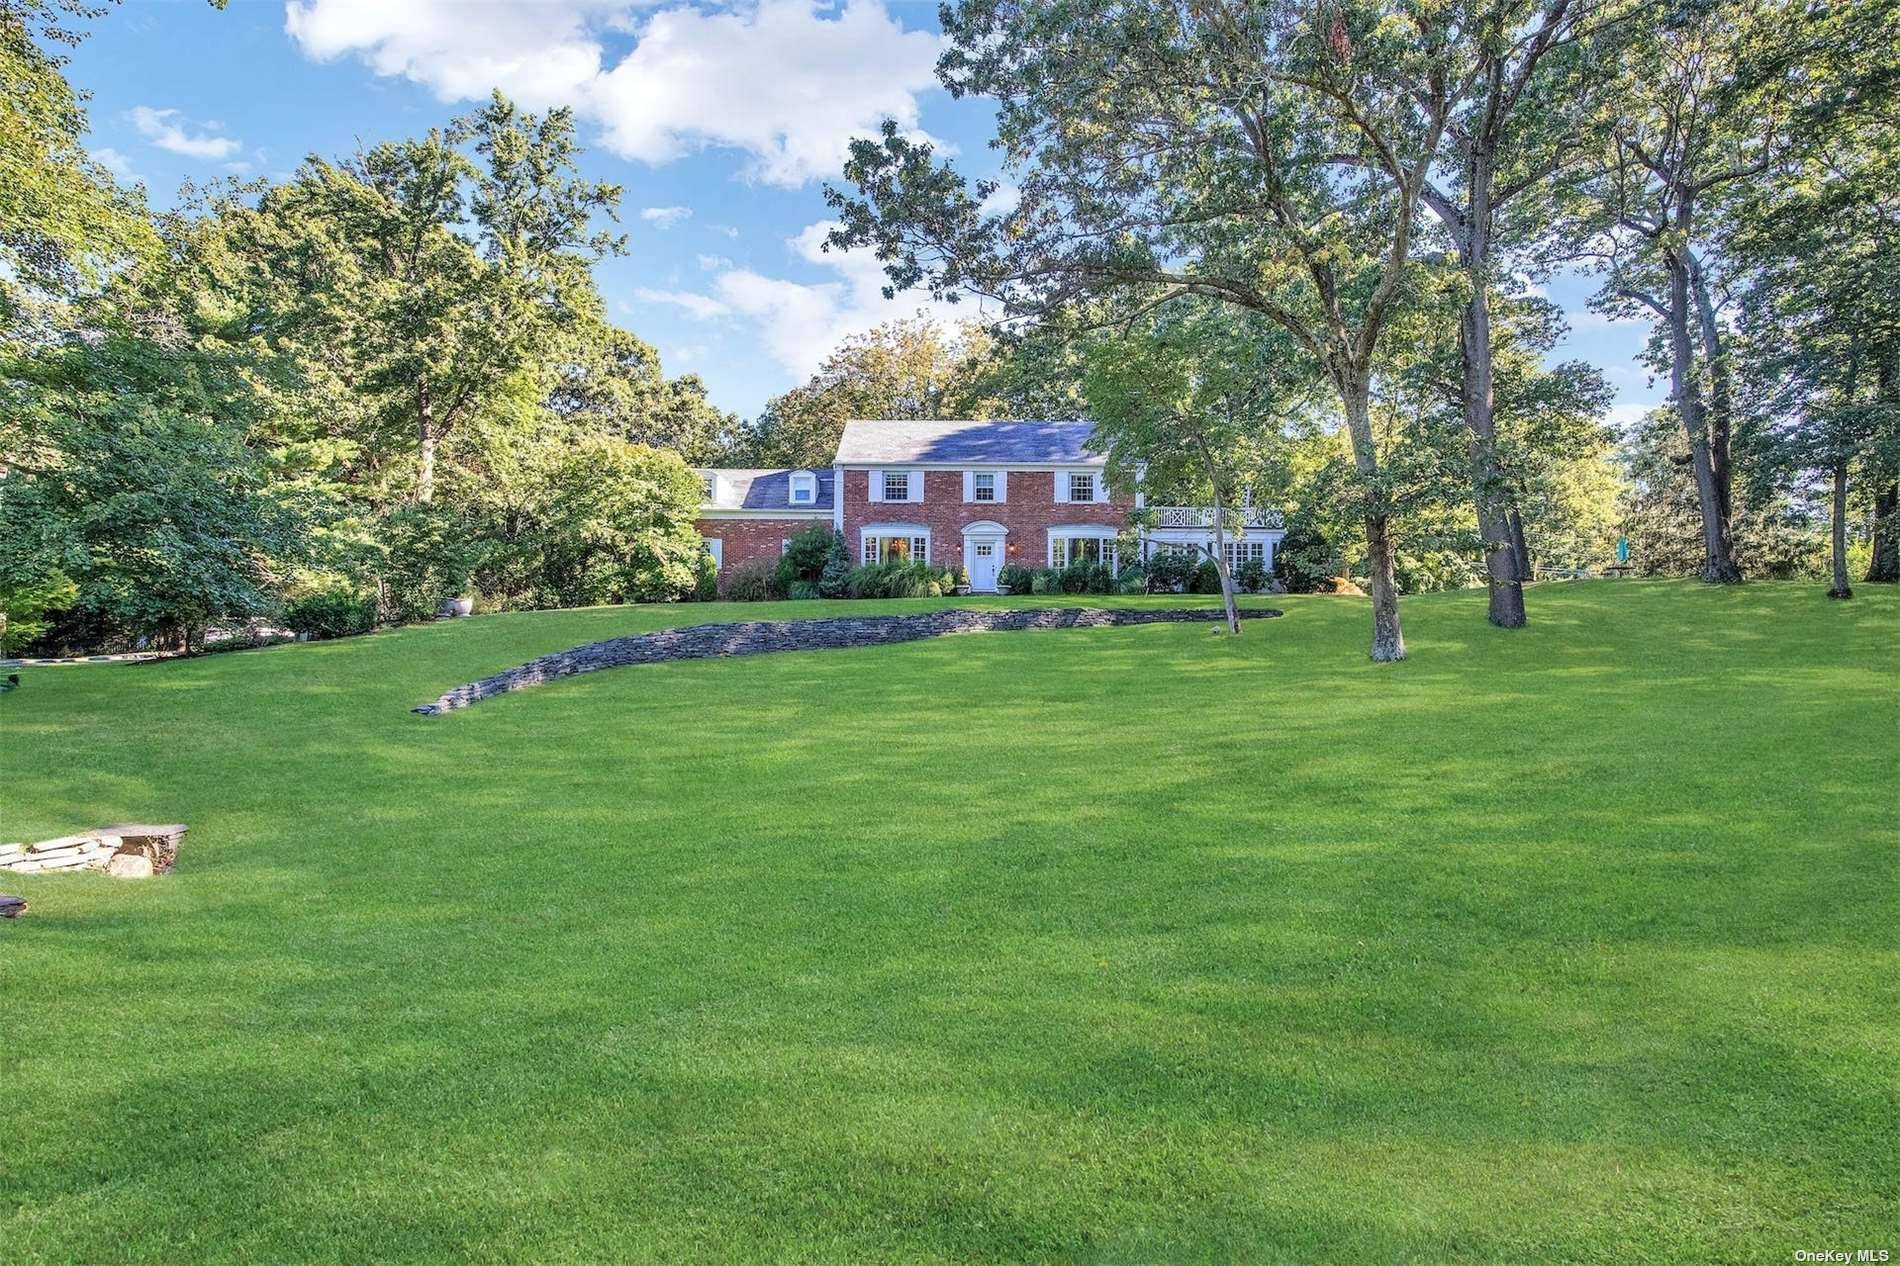 Majestic Brookville 3 acre estate like property, with sparkling inground pool, playground, slate patio, rolling emerald lawns, inground sprinklers, and 2 car garage.